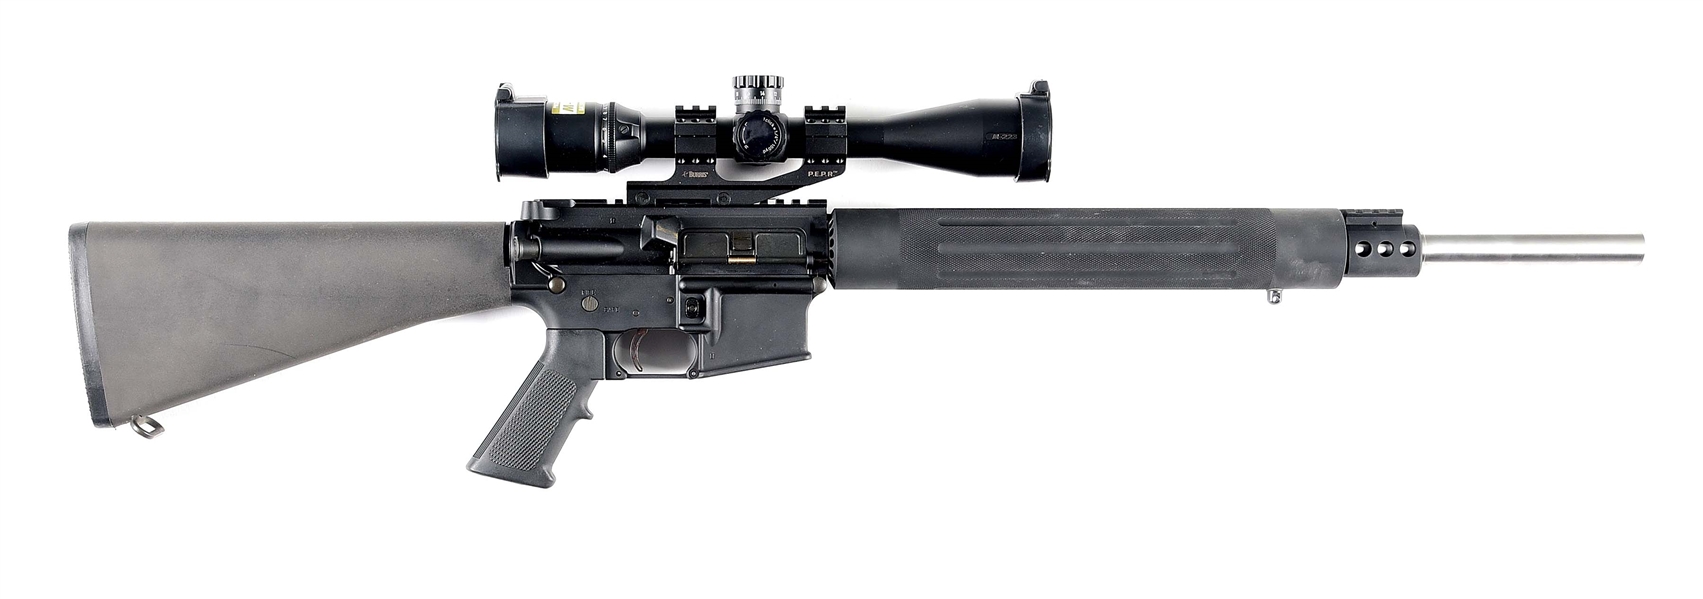 (M) ROCK RIVER ARMS LAR-15 SEMI AUTOMATIC RIFLE WITH SCOPE.